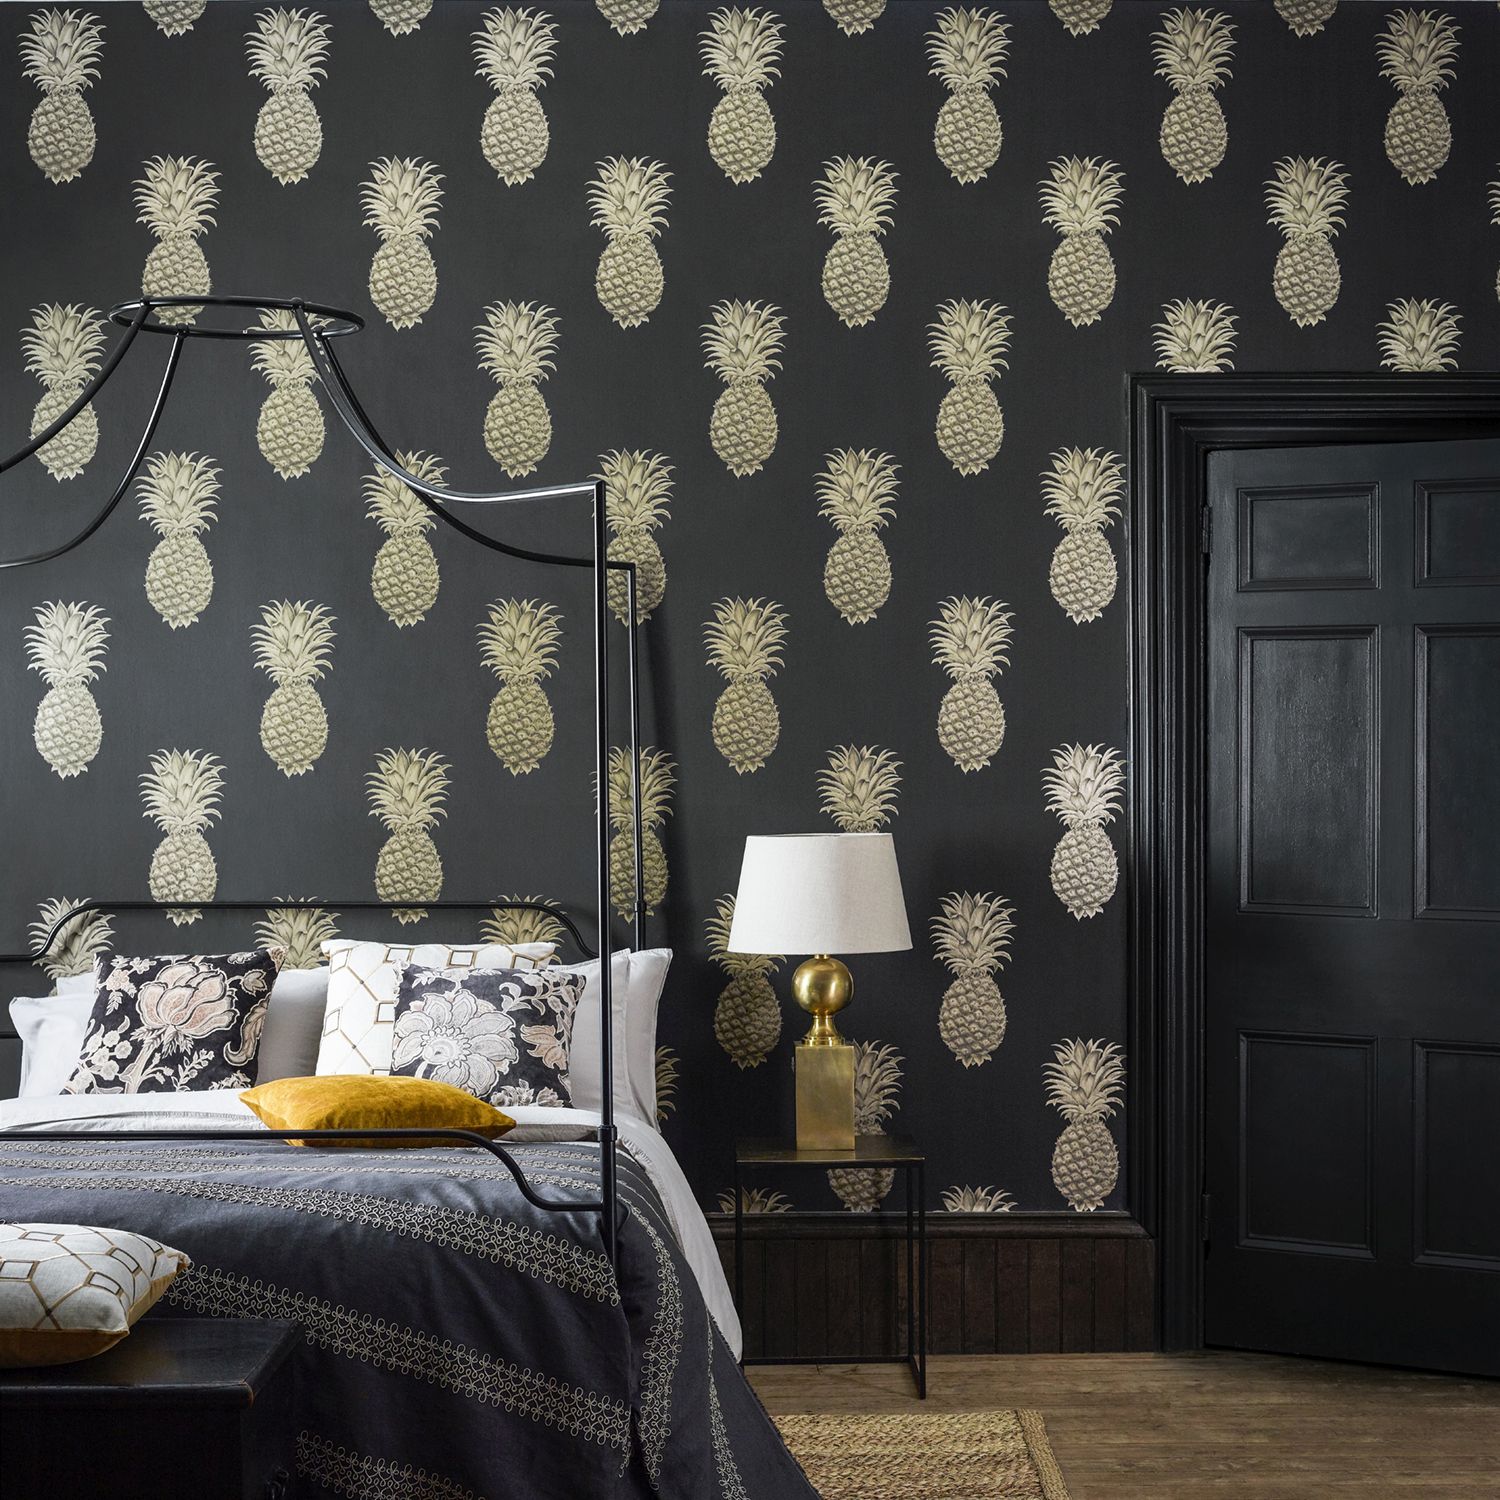 Black And Gold Bedroom Wallpaper Pineapple By Graphite - Sanderson Pineapple Royale - HD Wallpaper 